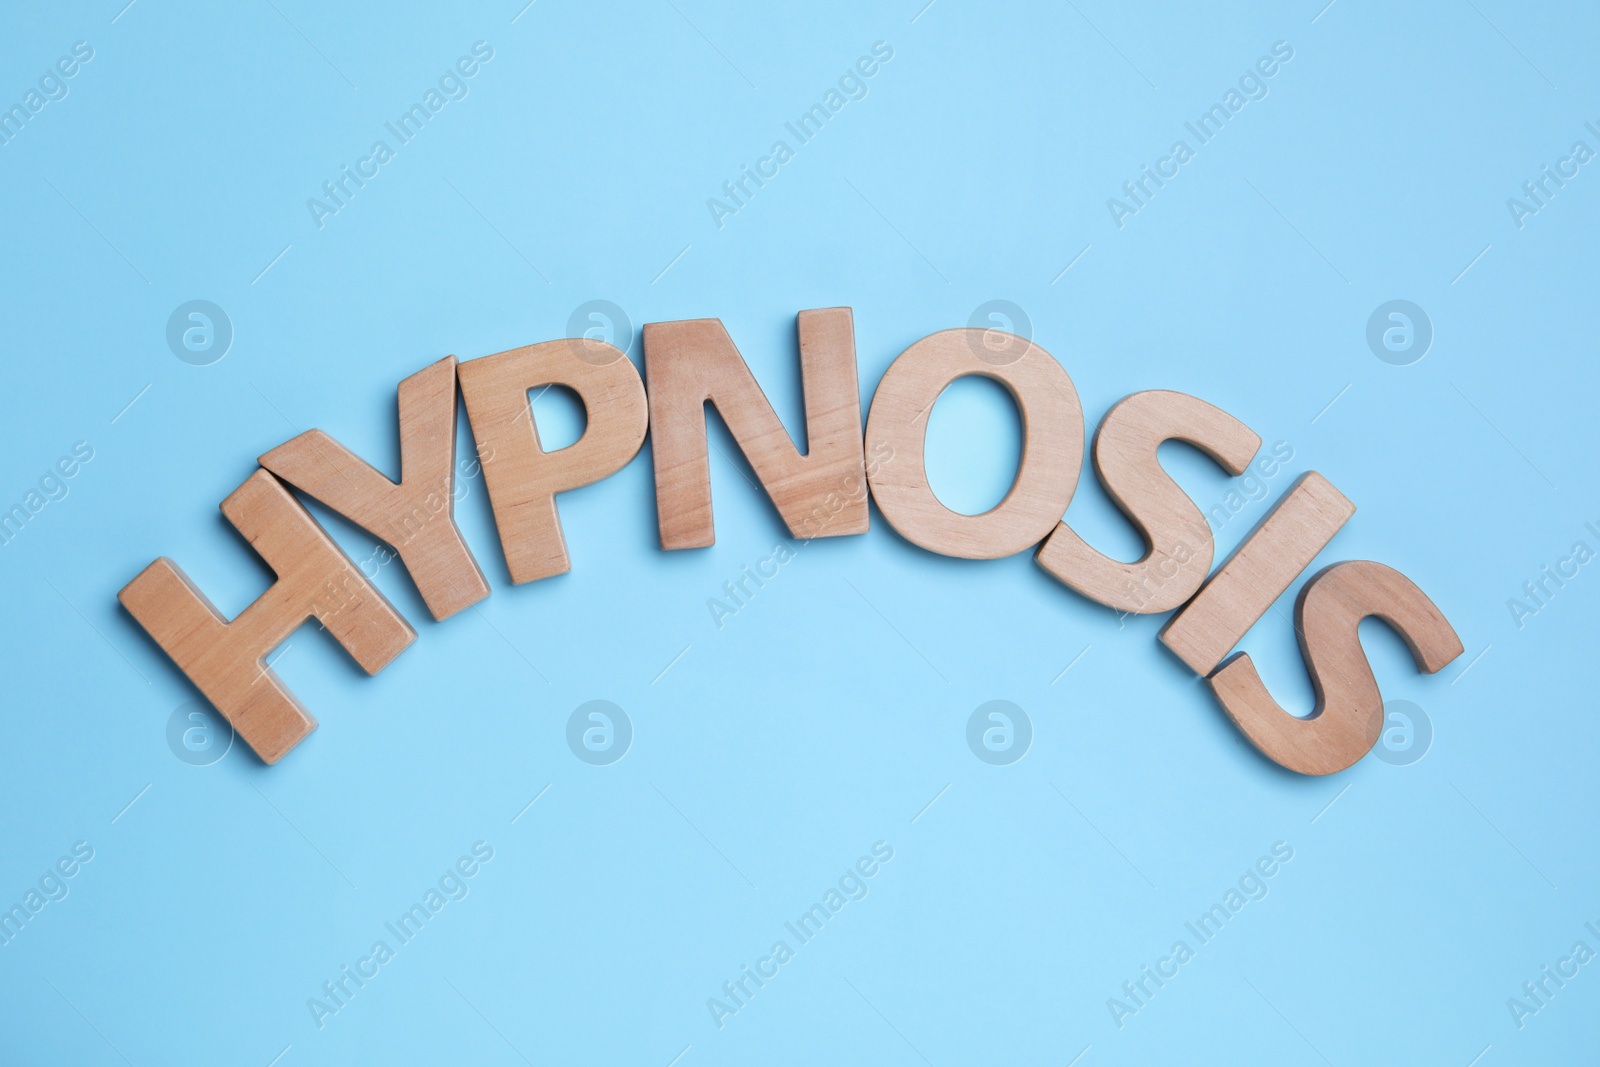 Photo of Word HYPNOSIS made with wooden letters on light blue background, flat lay